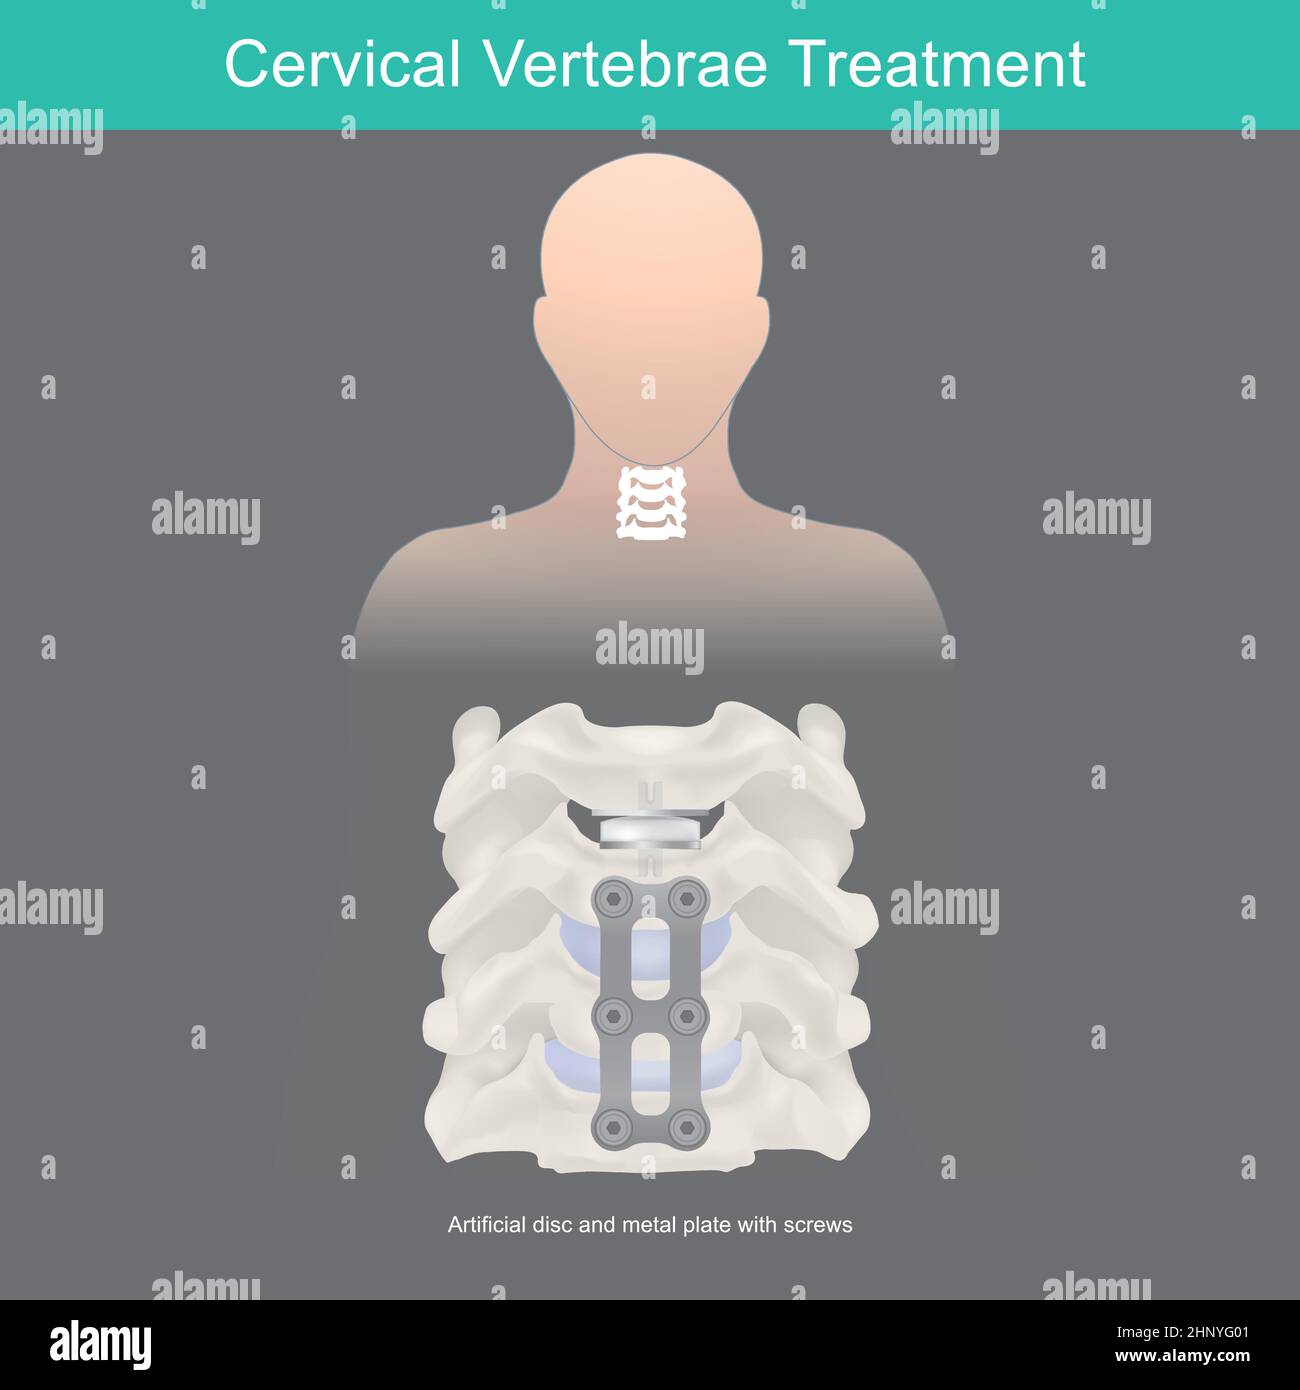 Cervical Vertebrae Treatment. Neck bone anatomy and artificial disc replacement. Stock Vector